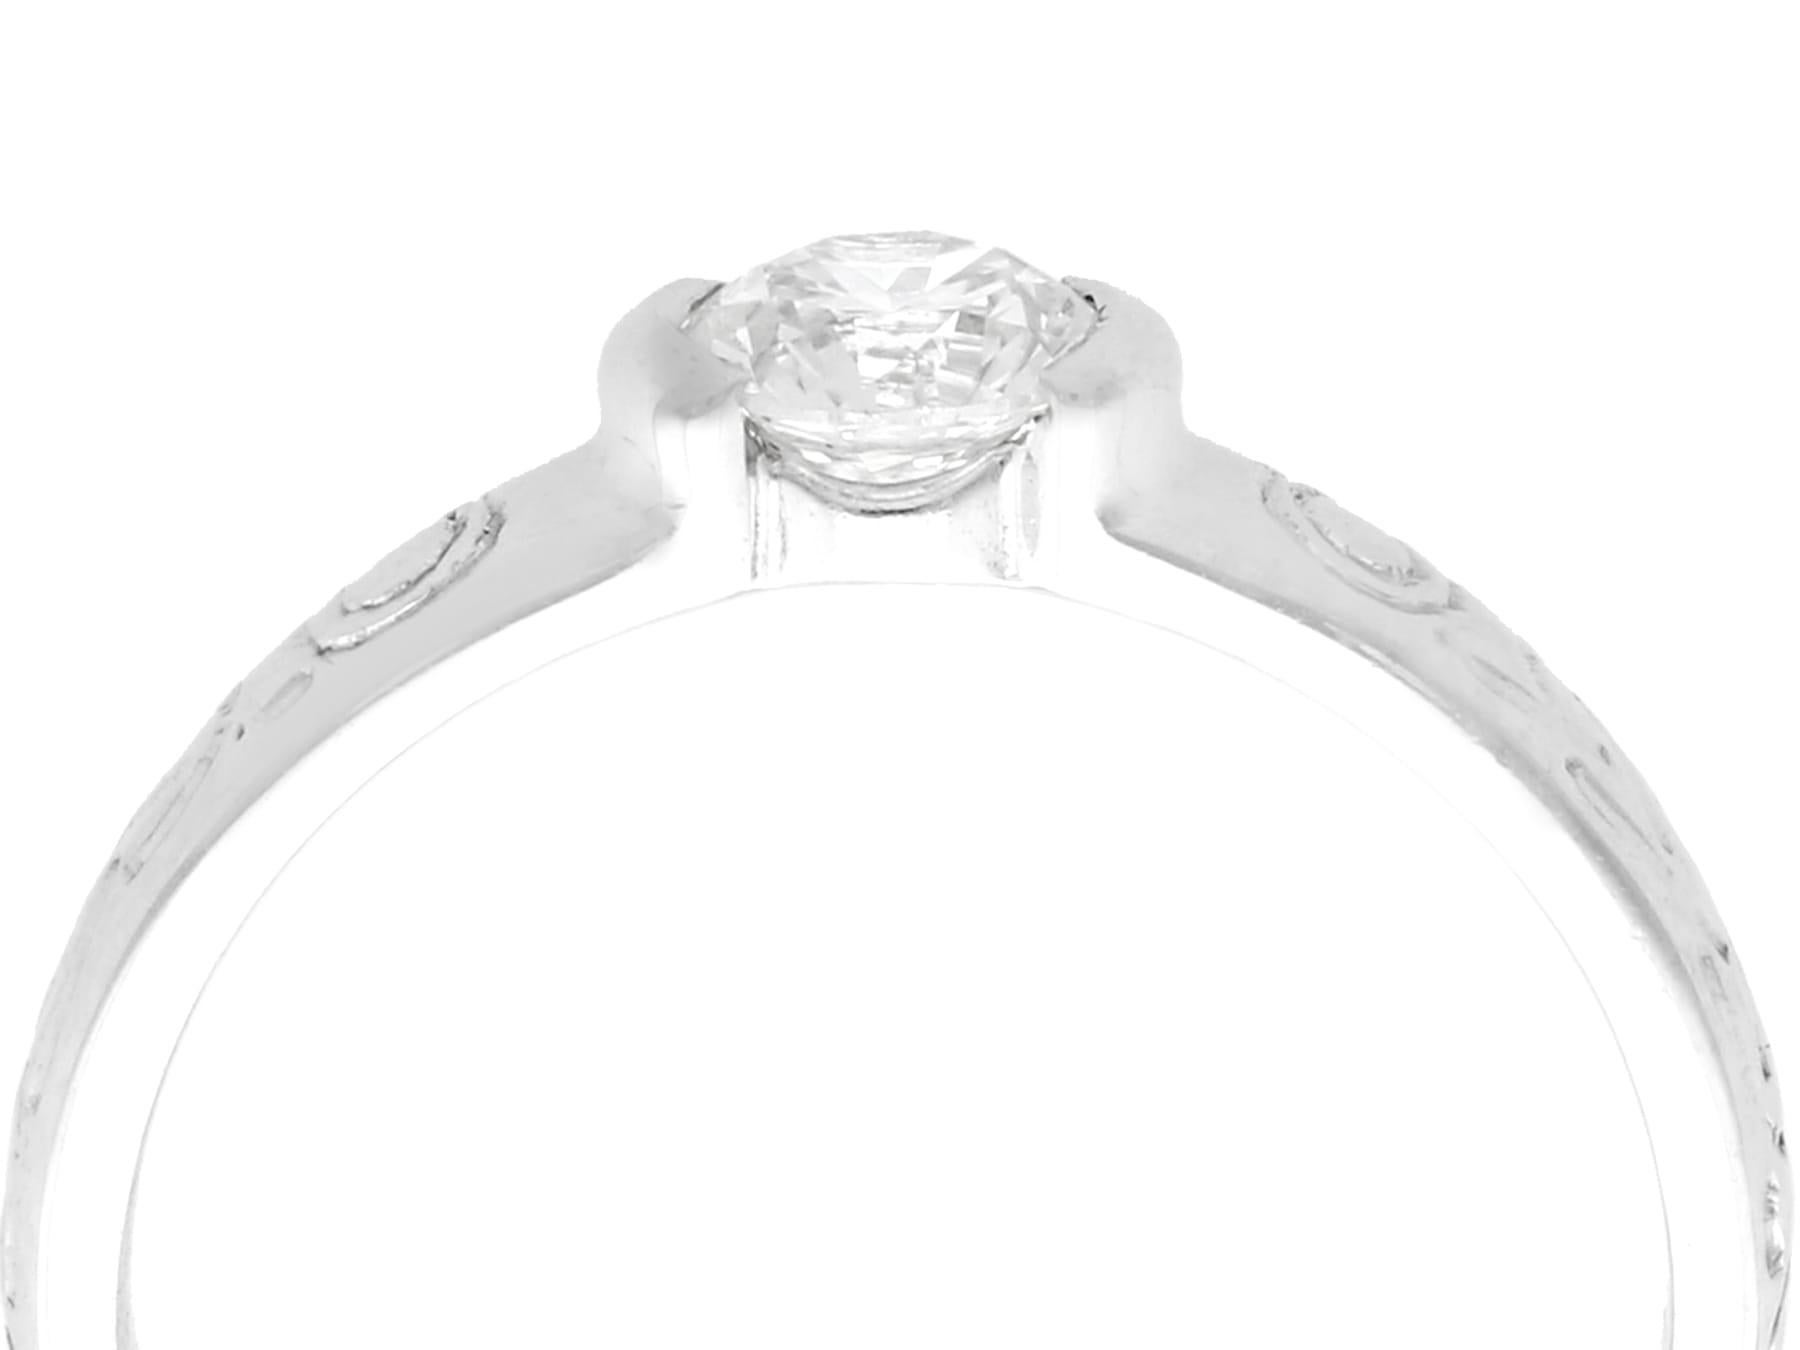 A fine and impressive contemporary 0.43 carat diamond and white gold solitaire and wedding band set; part of our diverse diamond and estate jewelry collections.

This fine and impressive diamond ring and band set has been crafted in 18k white